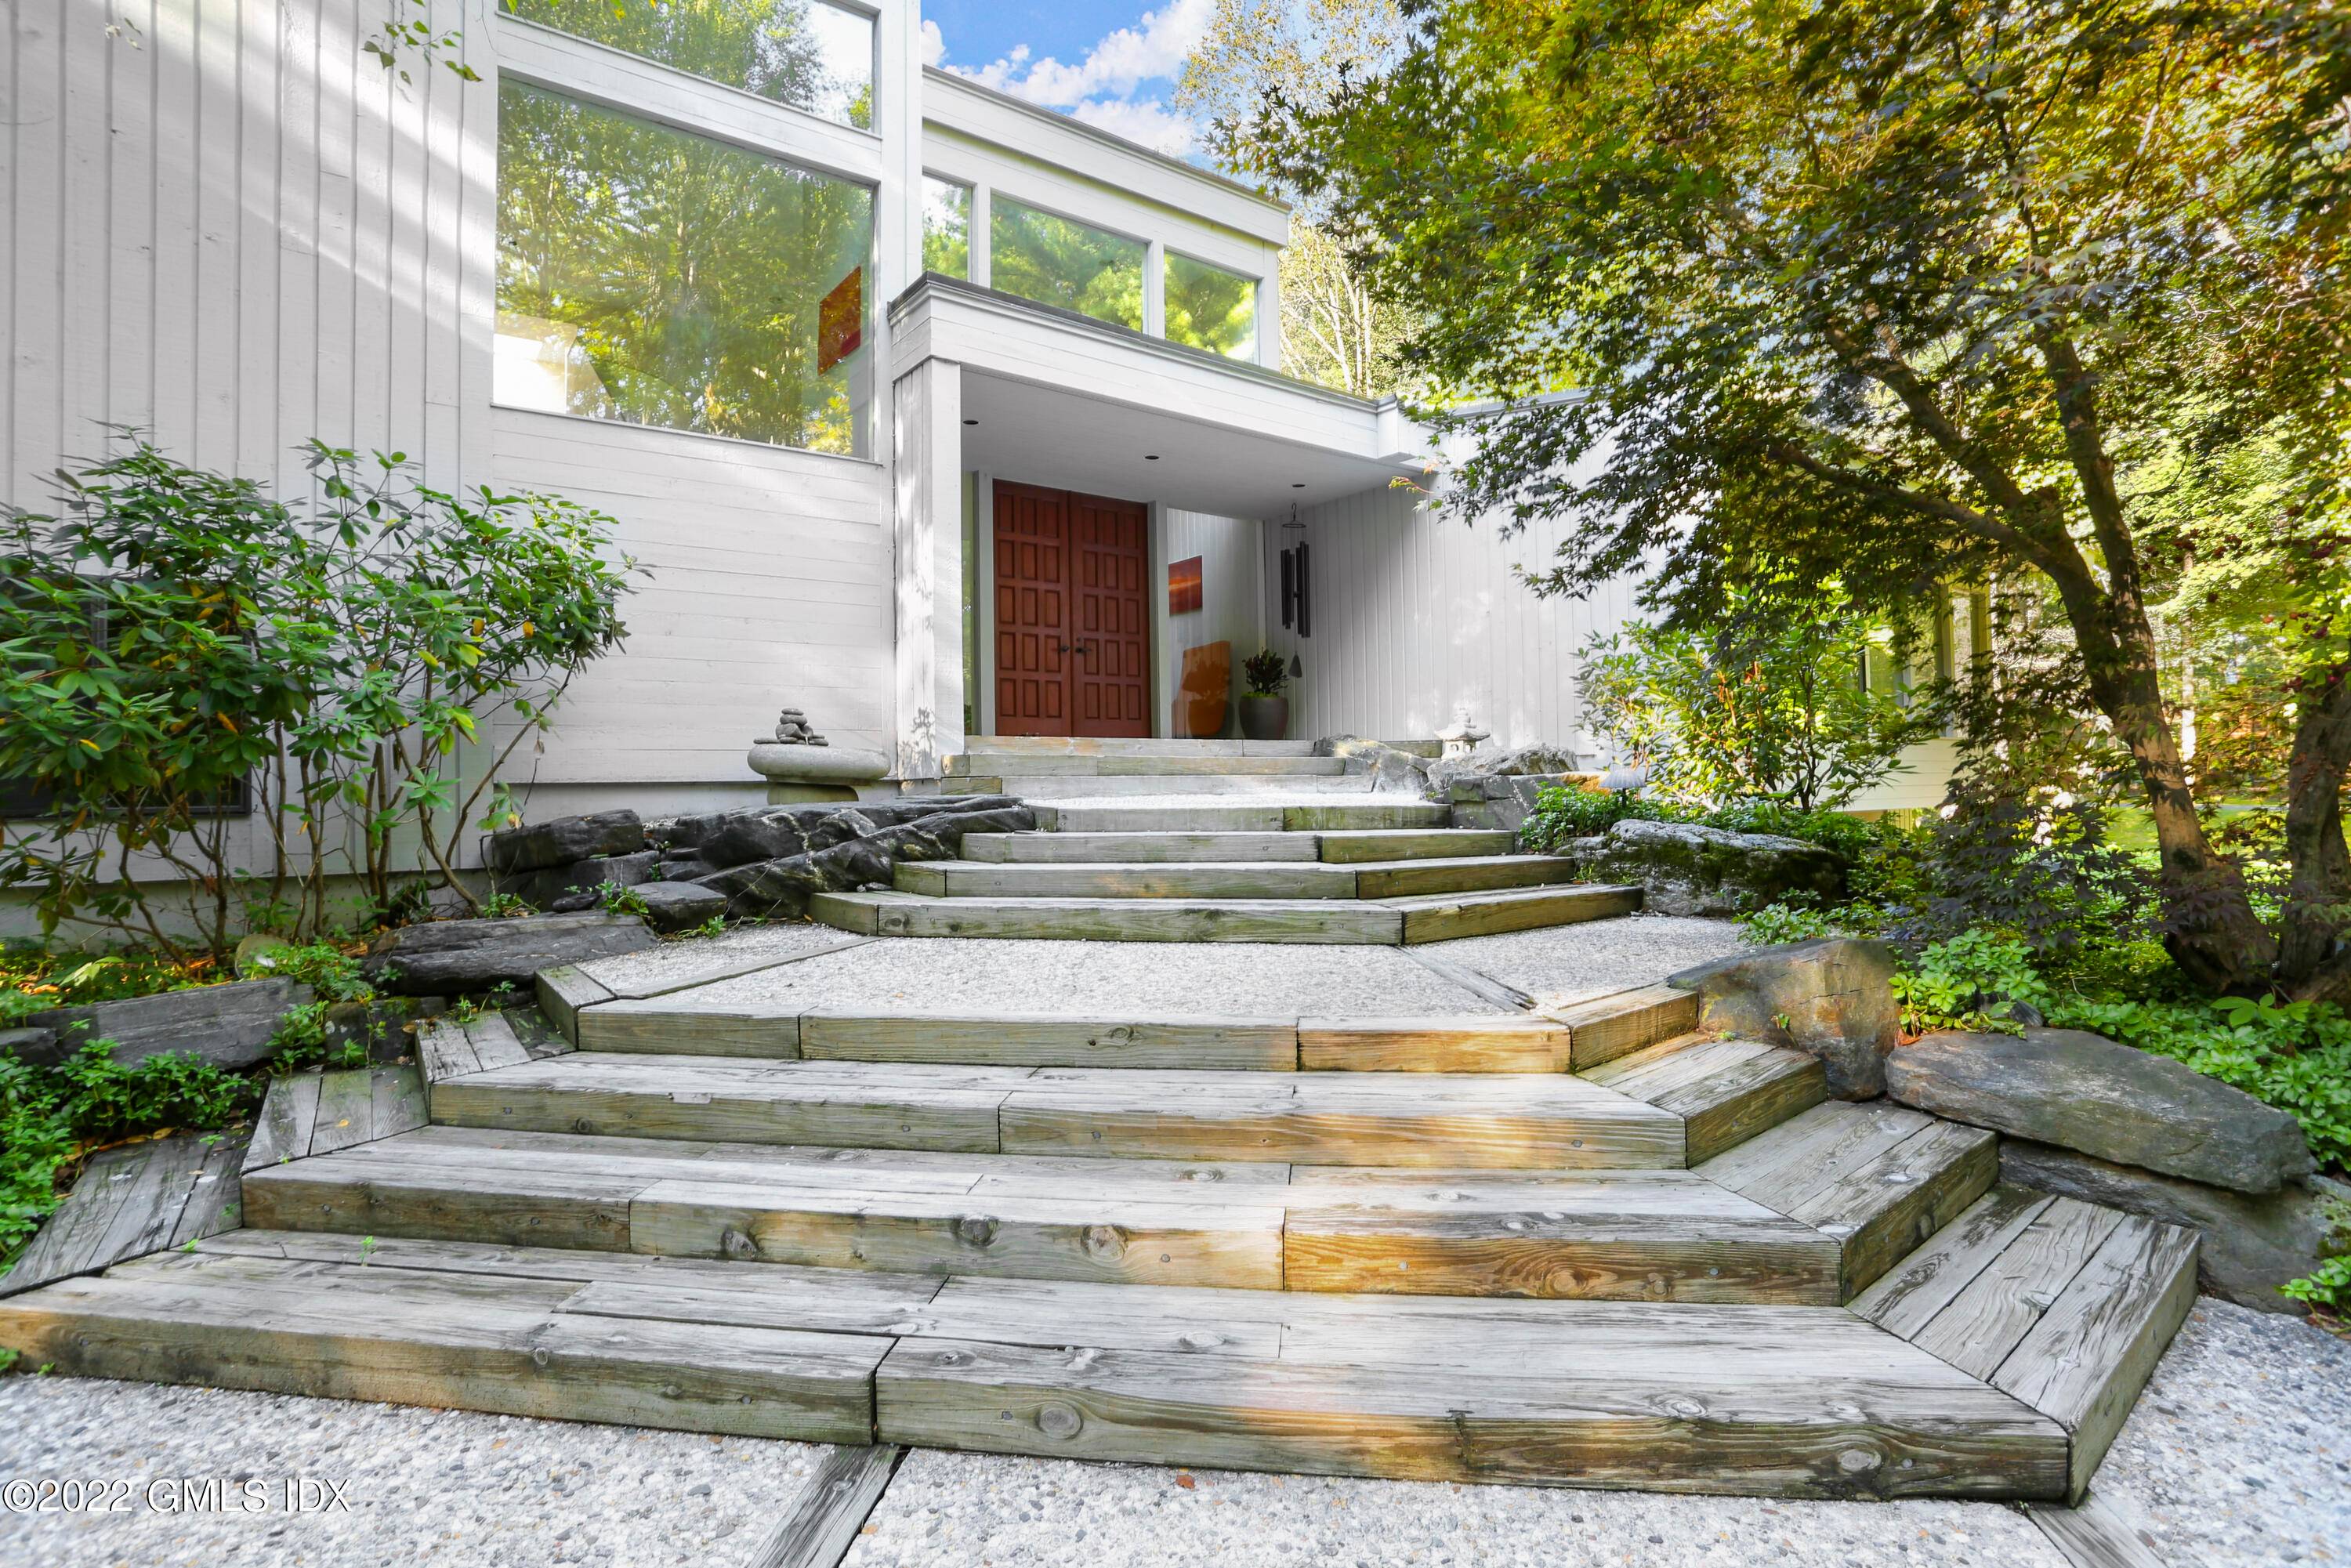 Breathtaking 5 bedroom contemporary with stunning views on a private cul de sac off the prestigious John Street in Greenwich.